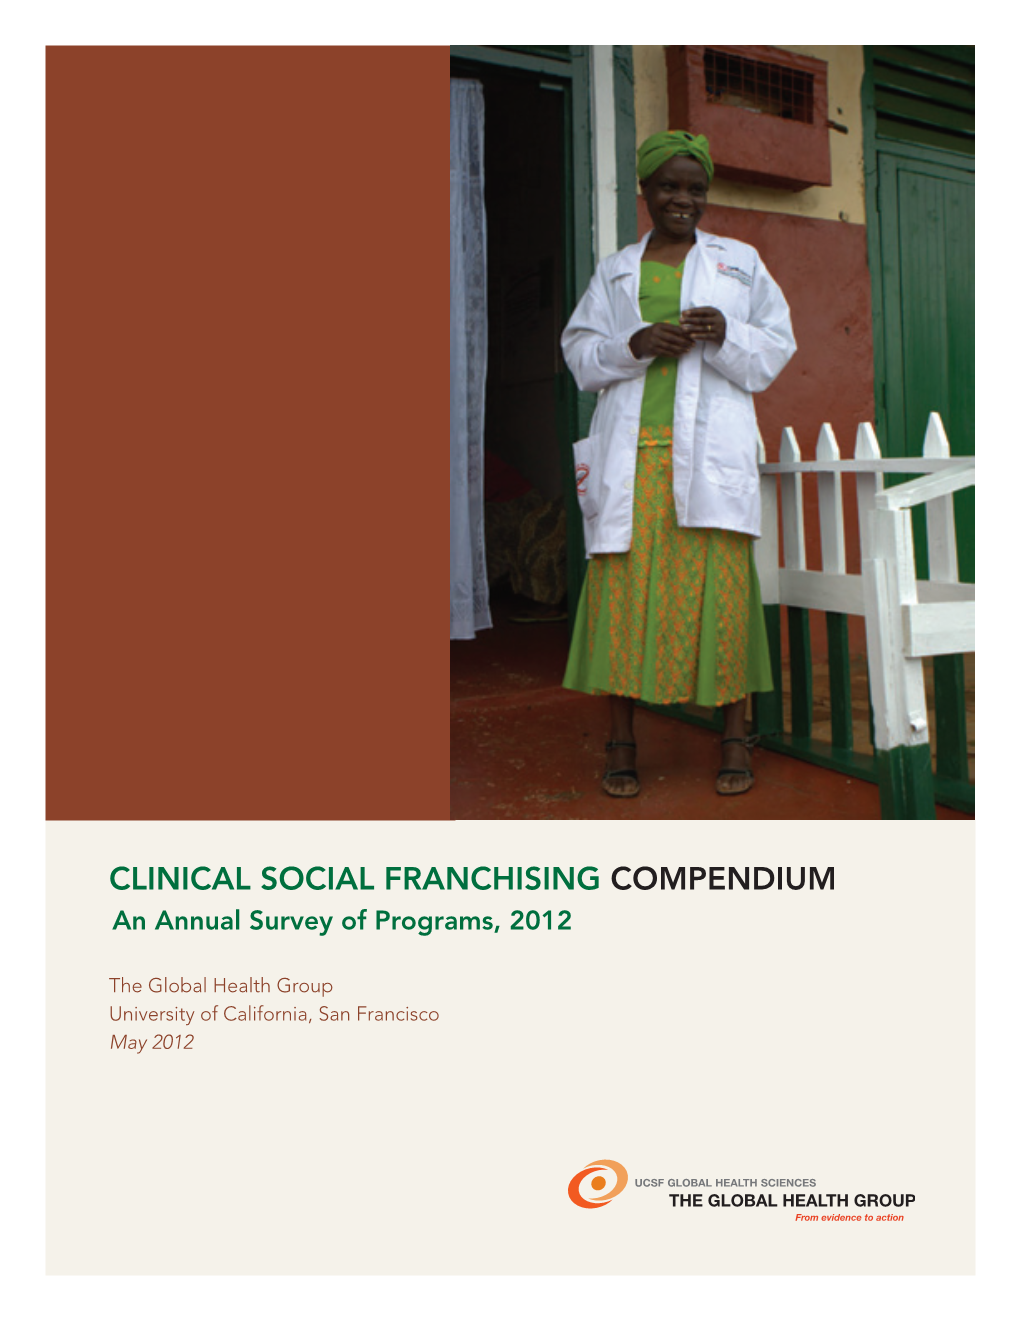 Clinical Social Franchising Compendium an Annual Survey of Programs, 2012